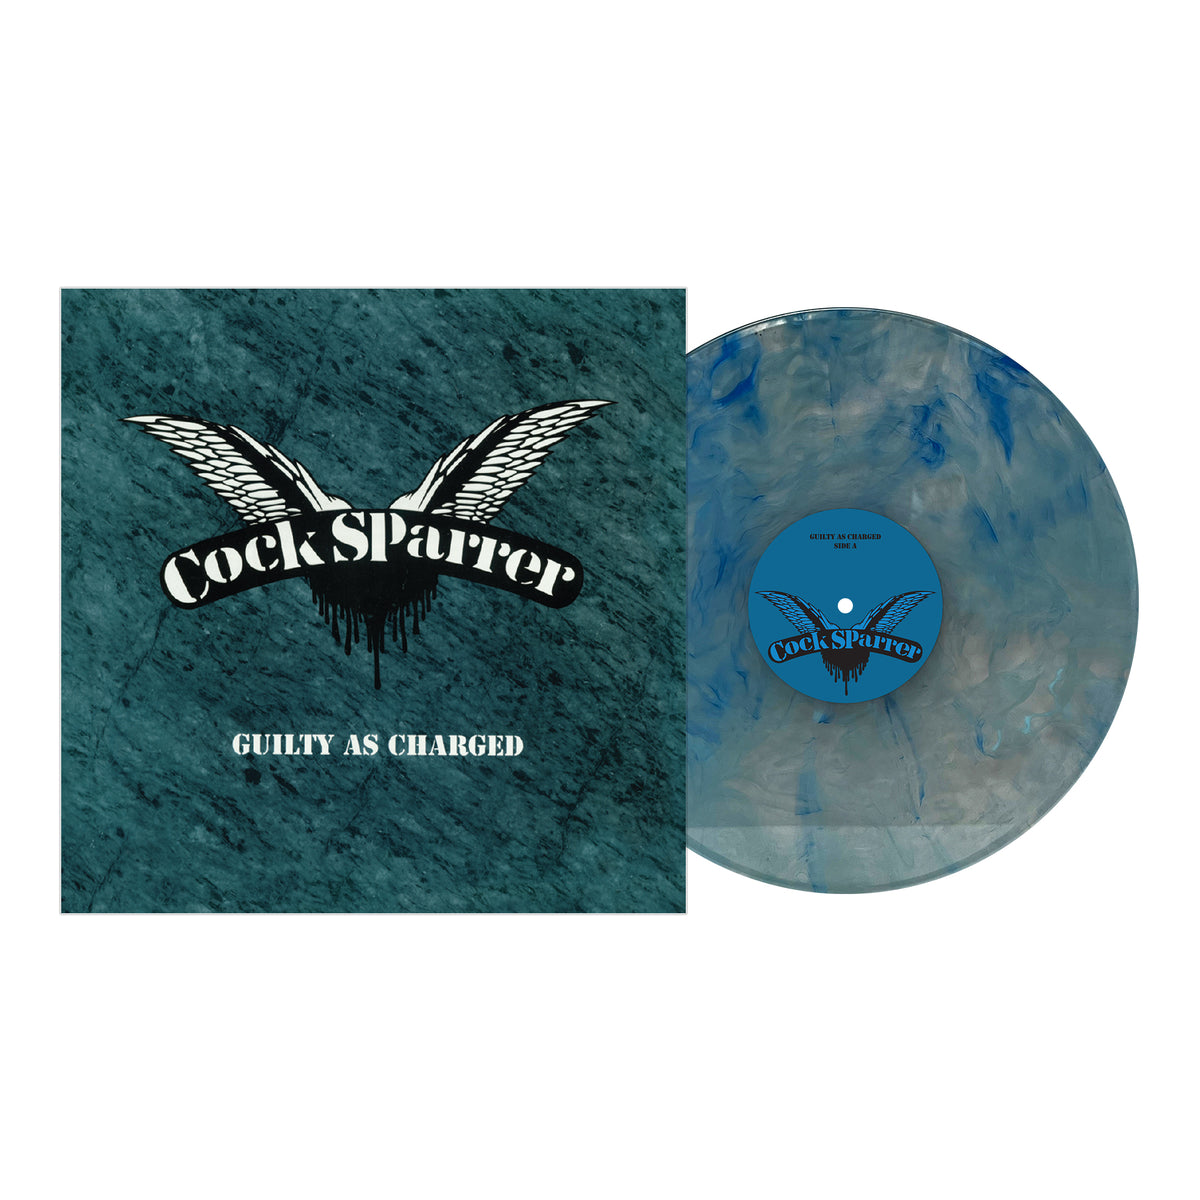 Cock Sparrer - Guilty As Charged - Sapphire Marble - Vinyl LP